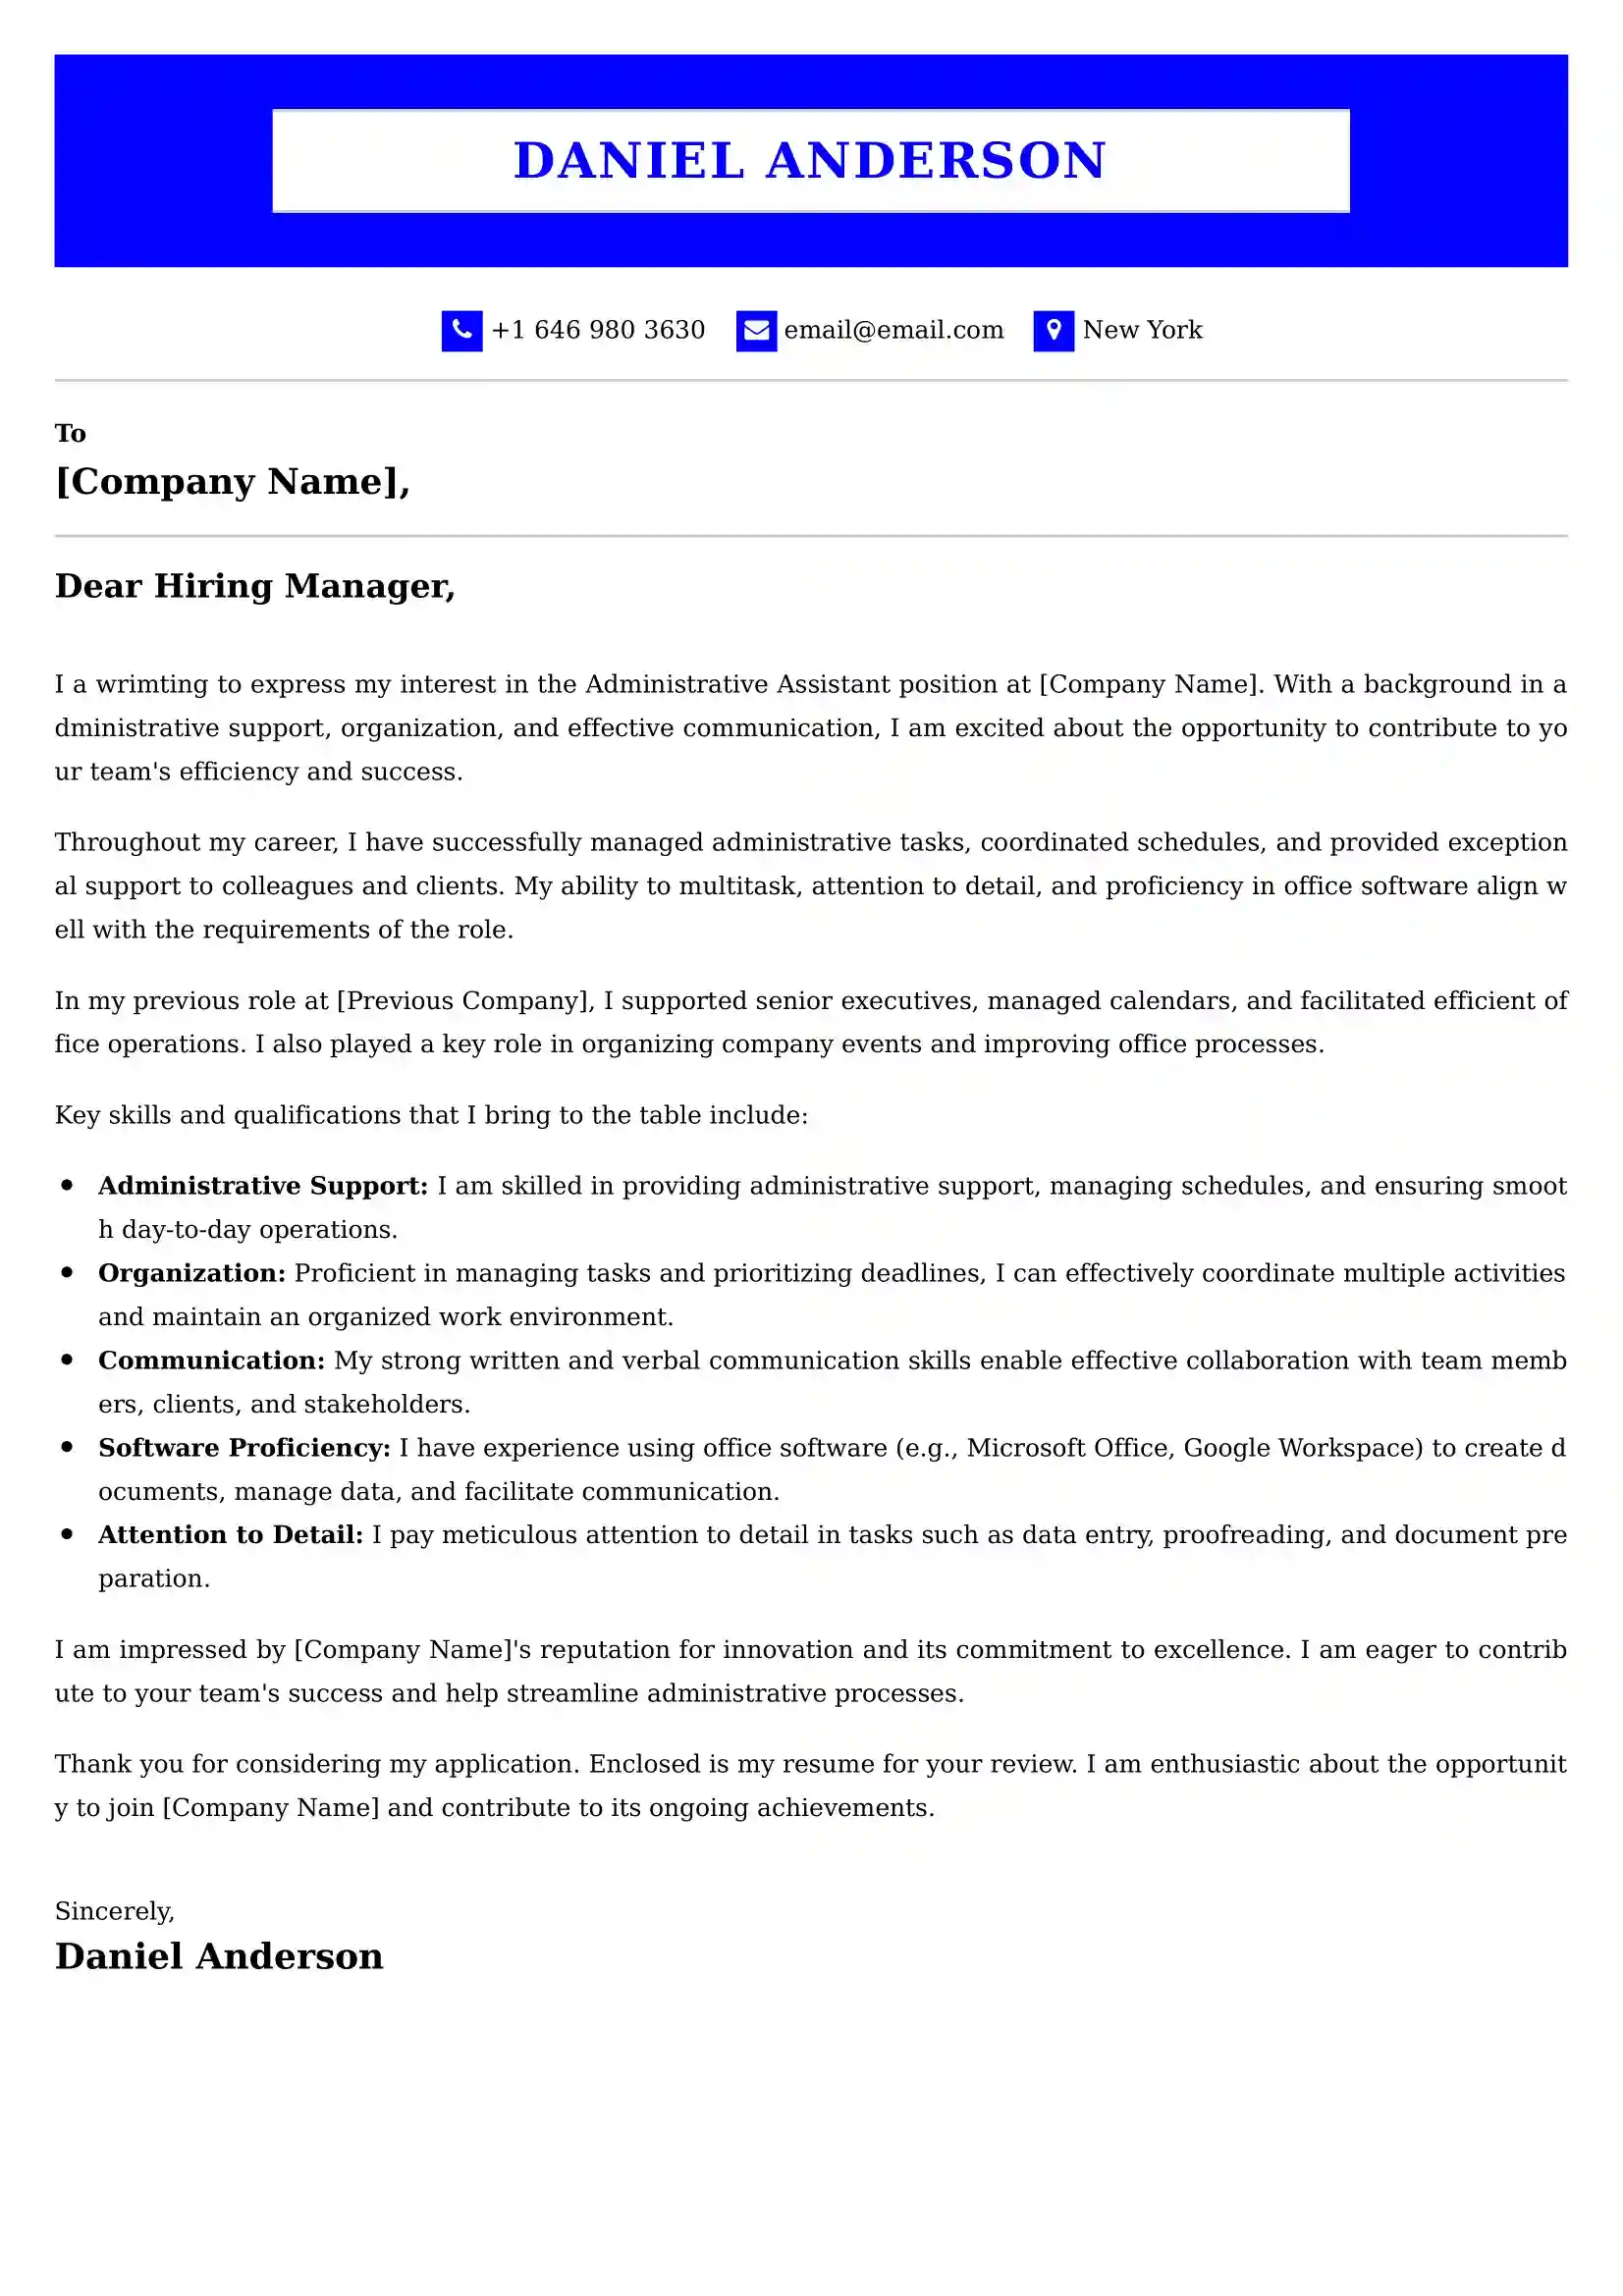 Administrative Assistant Cover Letter Examples UK - Tips and Guide